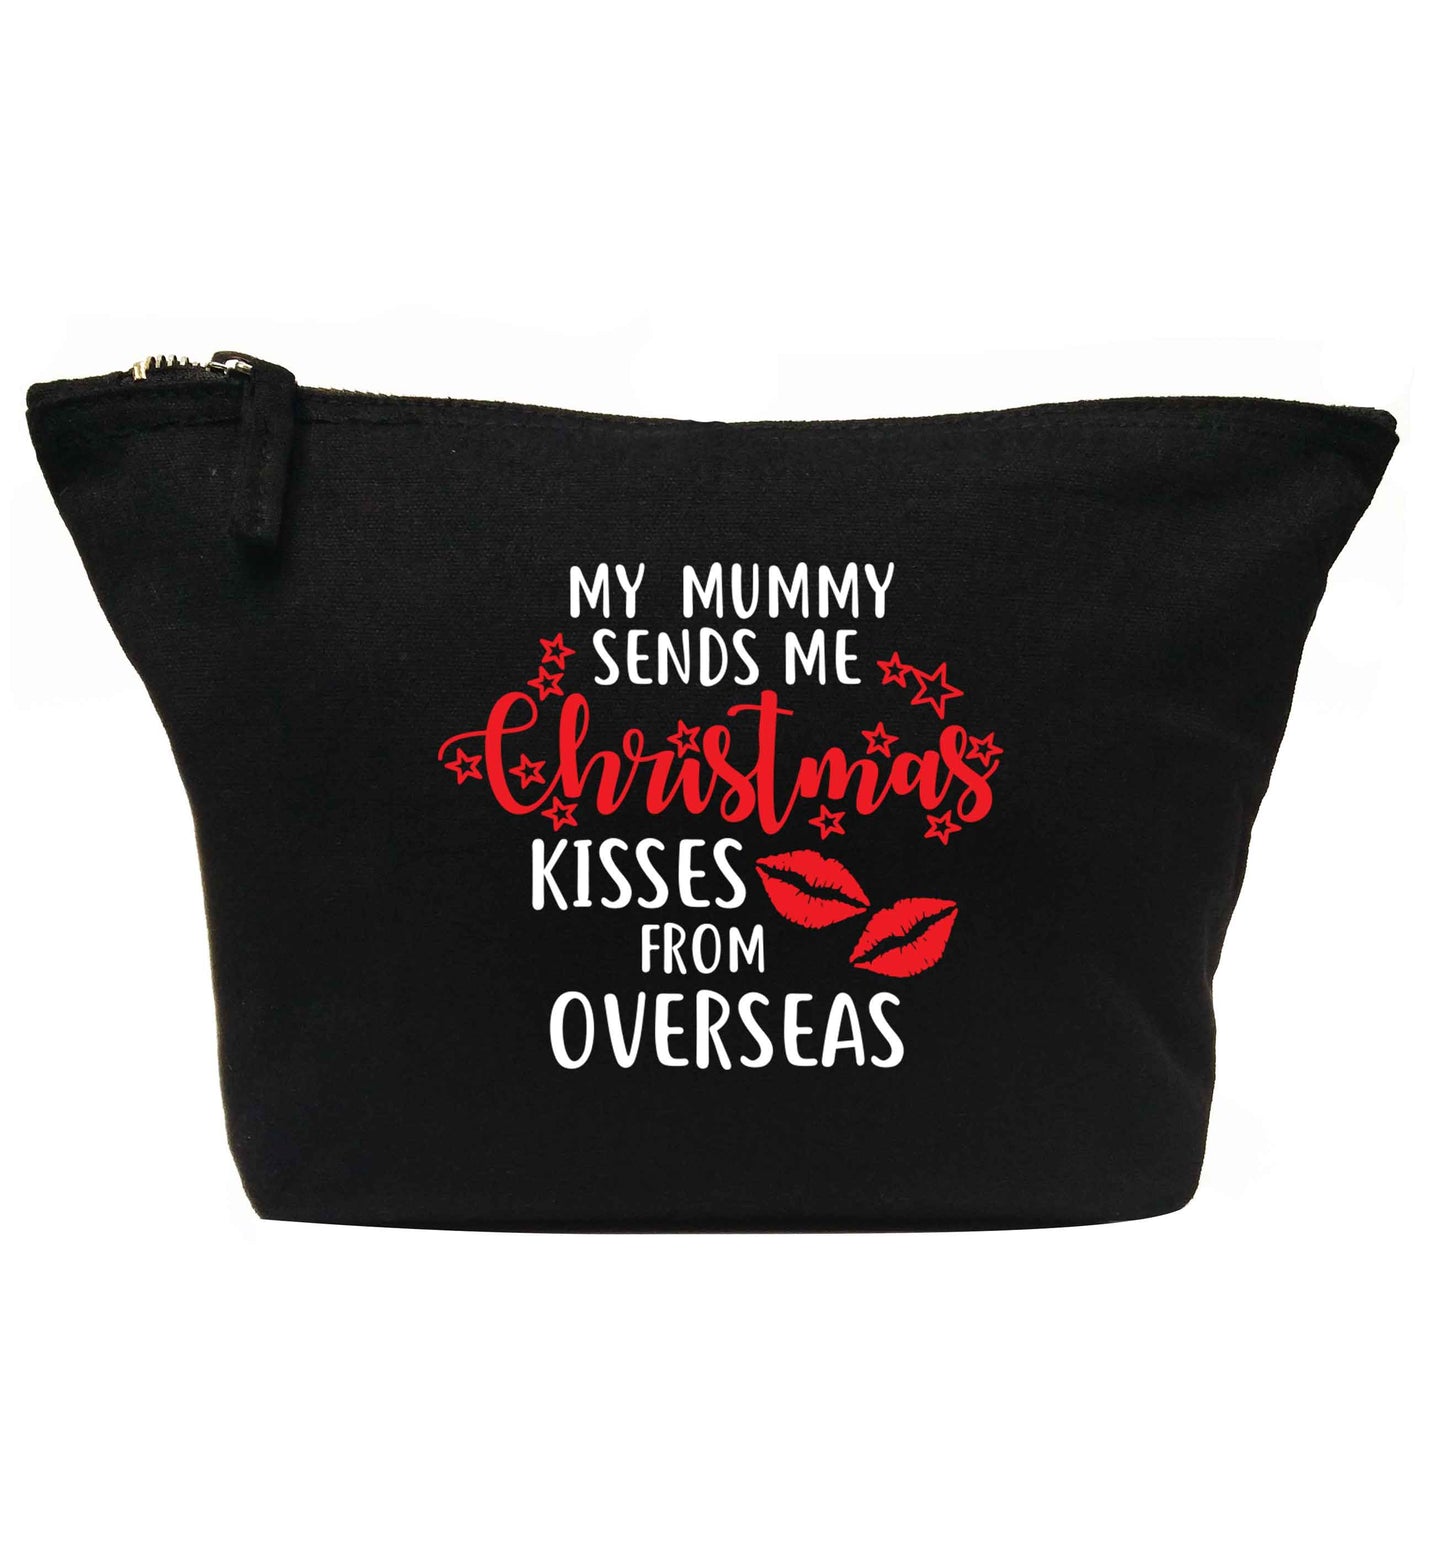 My mummy sends me Christmas kisses from overseas | Makeup / wash bag